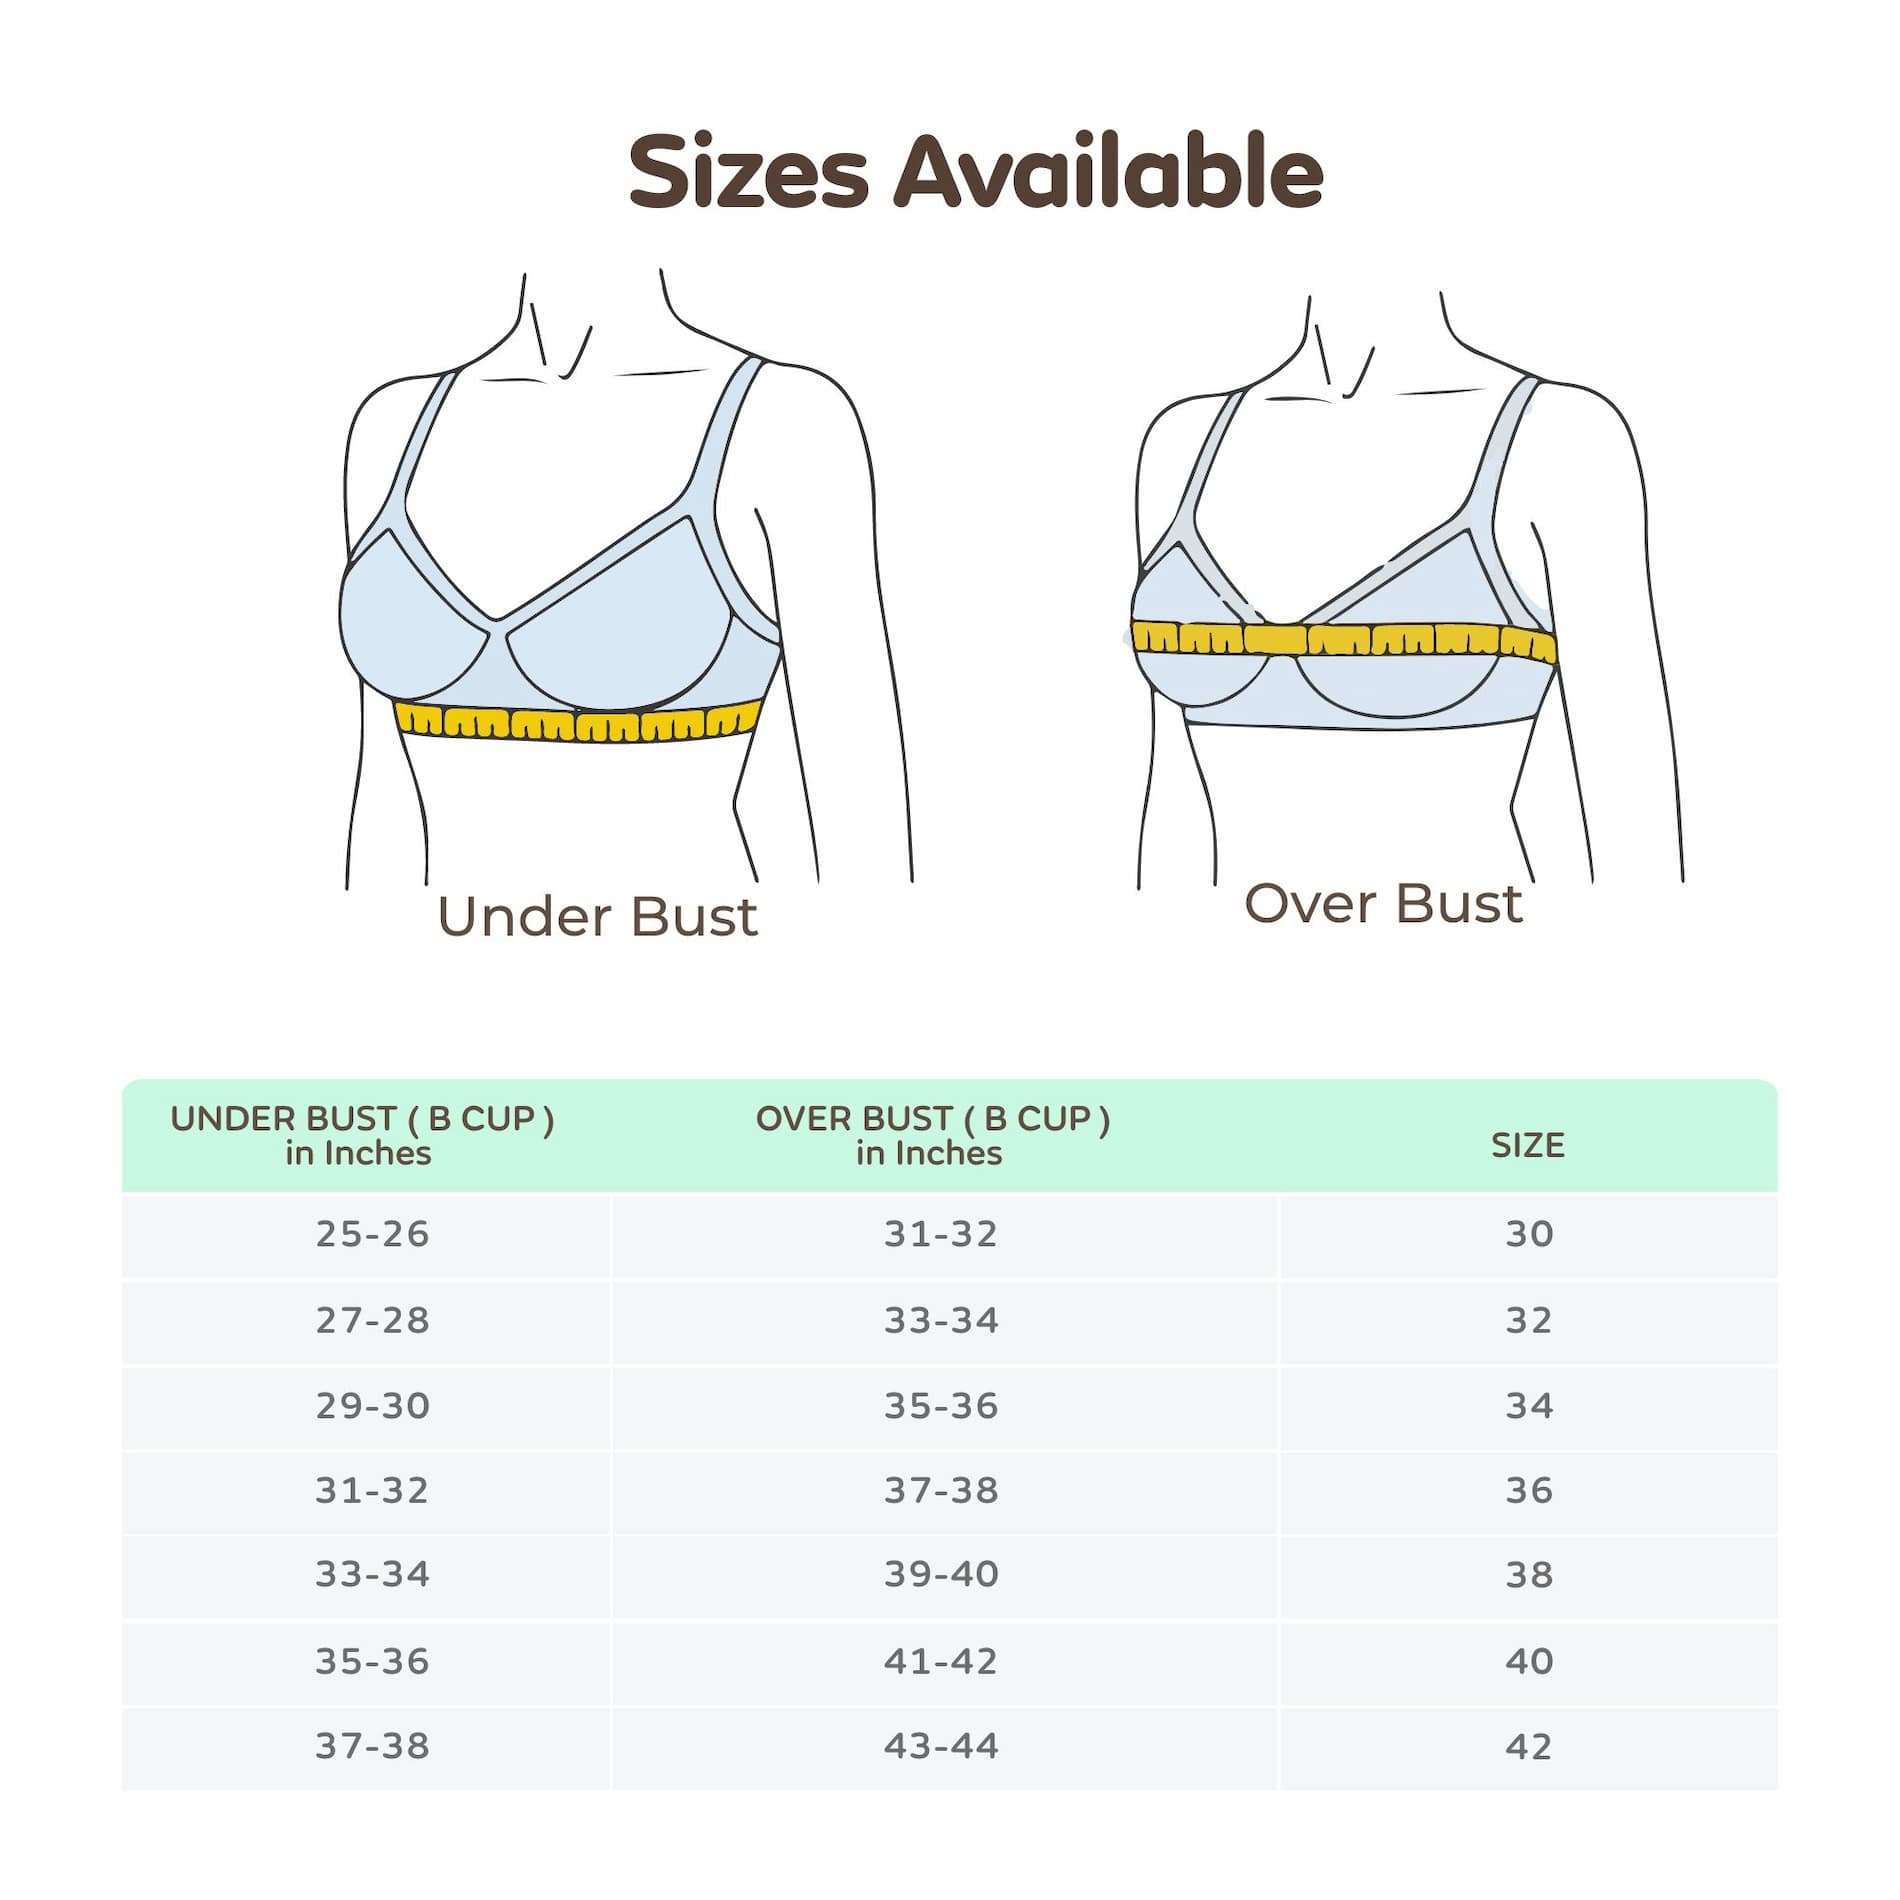 Mylo Maternity/Nursing Bras Non-Wired, Non-Padded with free Bra Extender – Persian Blue 32 B 